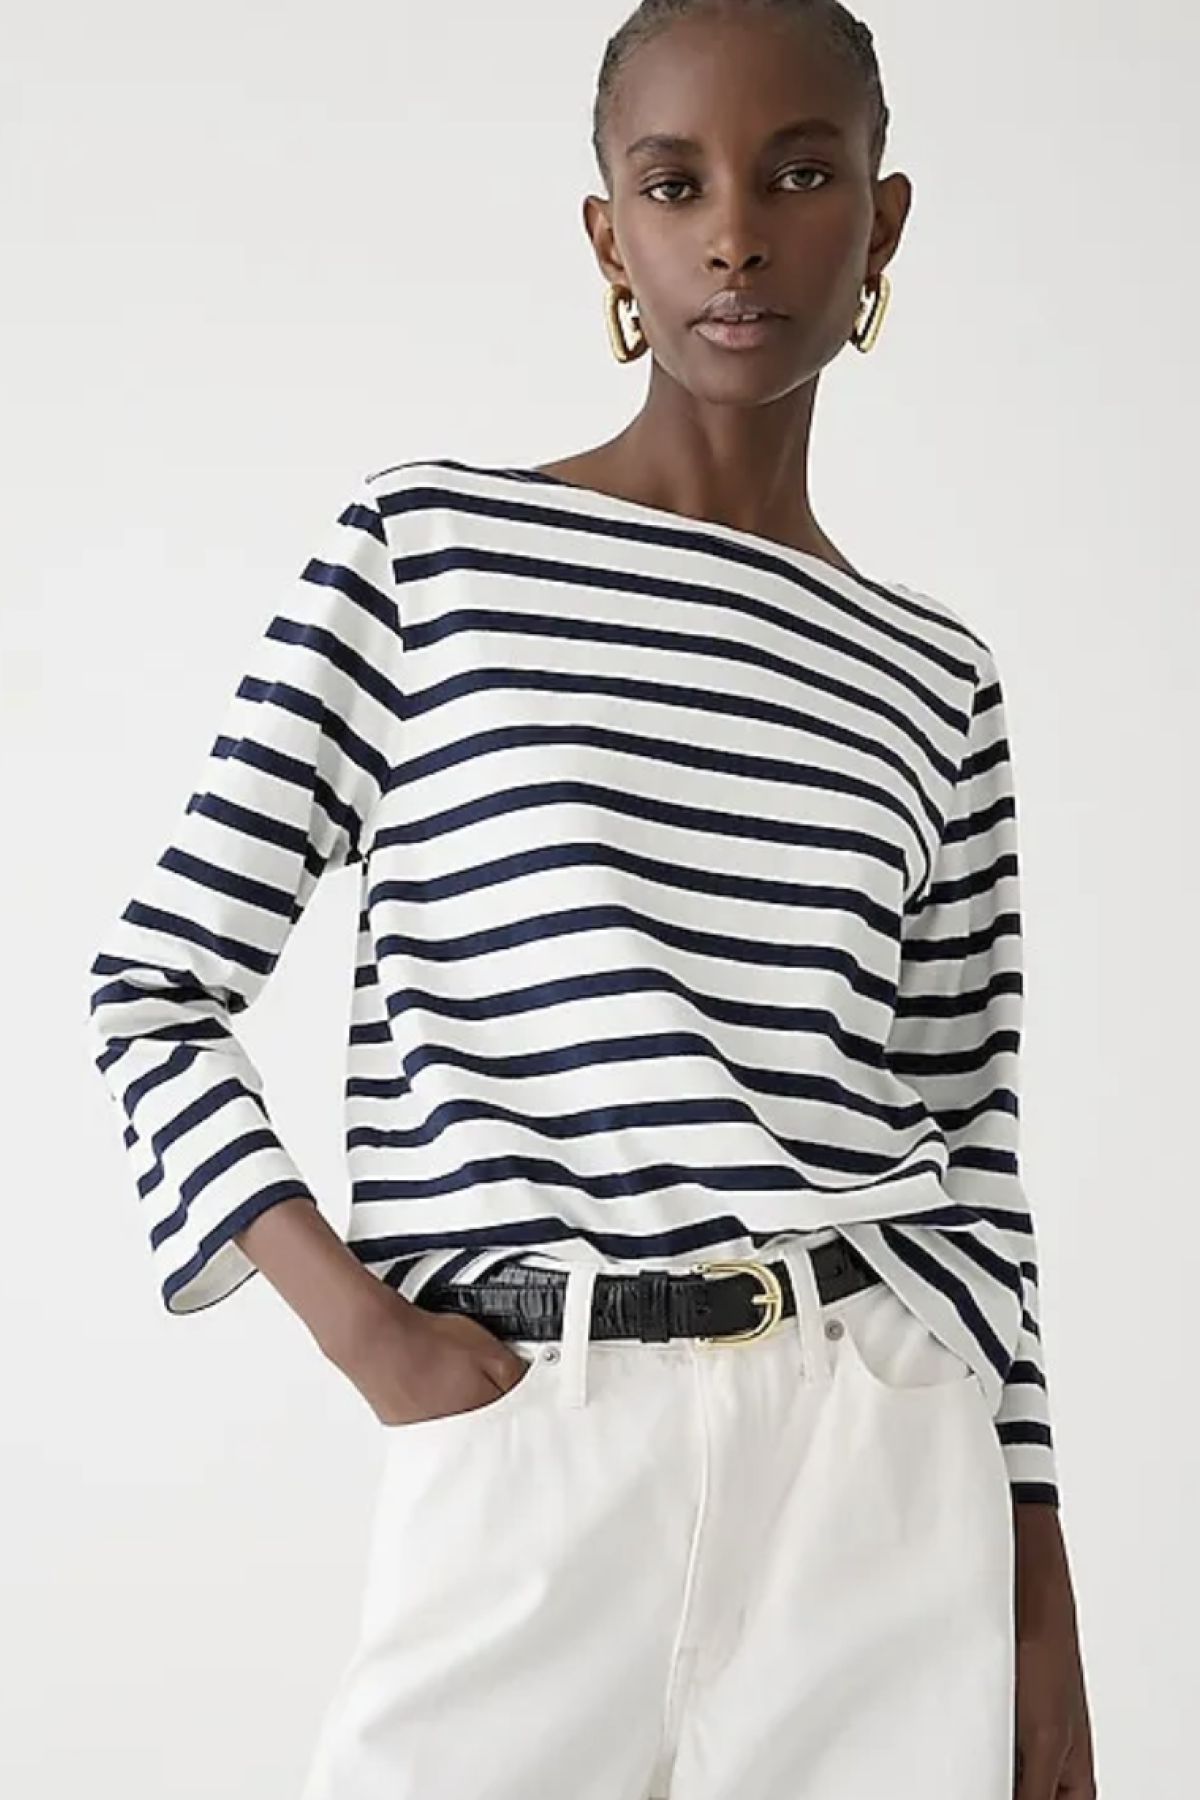 Classic Mariner Cloth Boatneck T-Shirt in Stripe